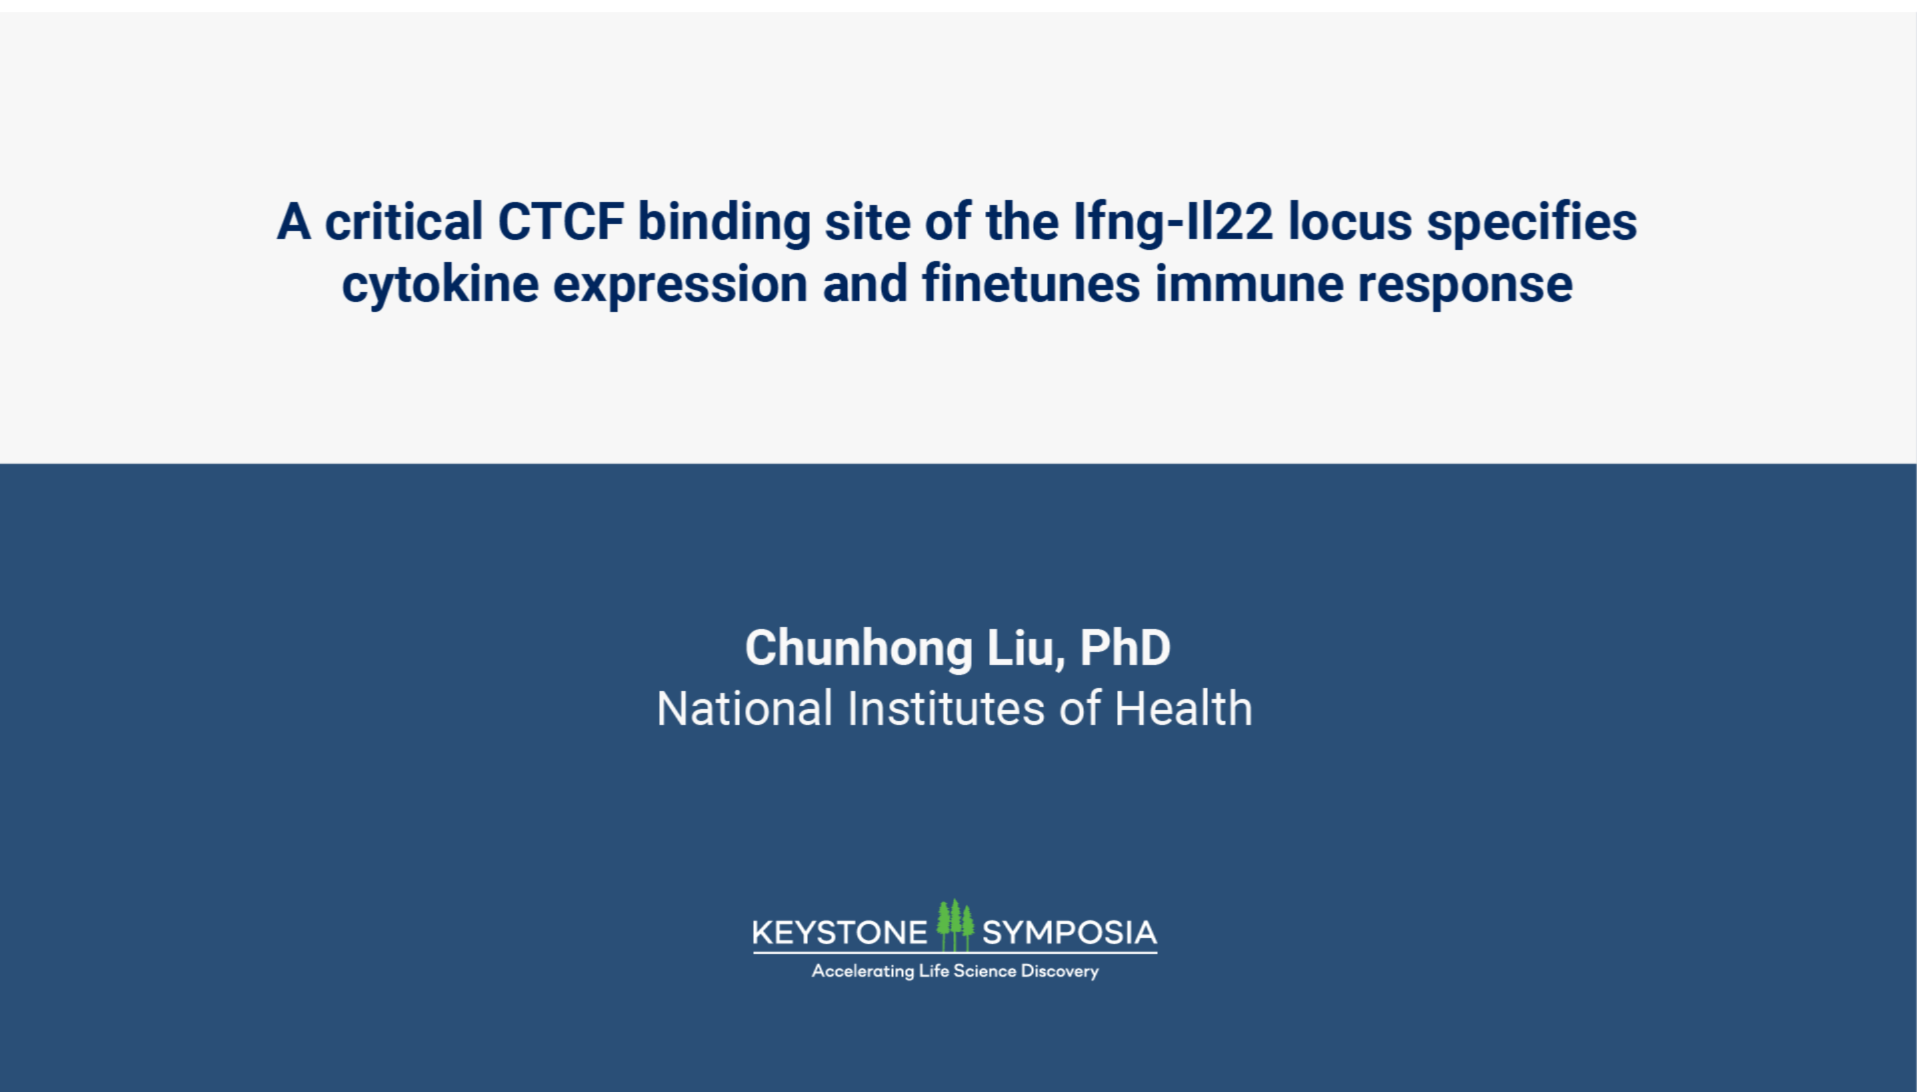 A critical CTCF binding site of the Ifng locus regulates the accurate and dynamic transcription of cytokines icon